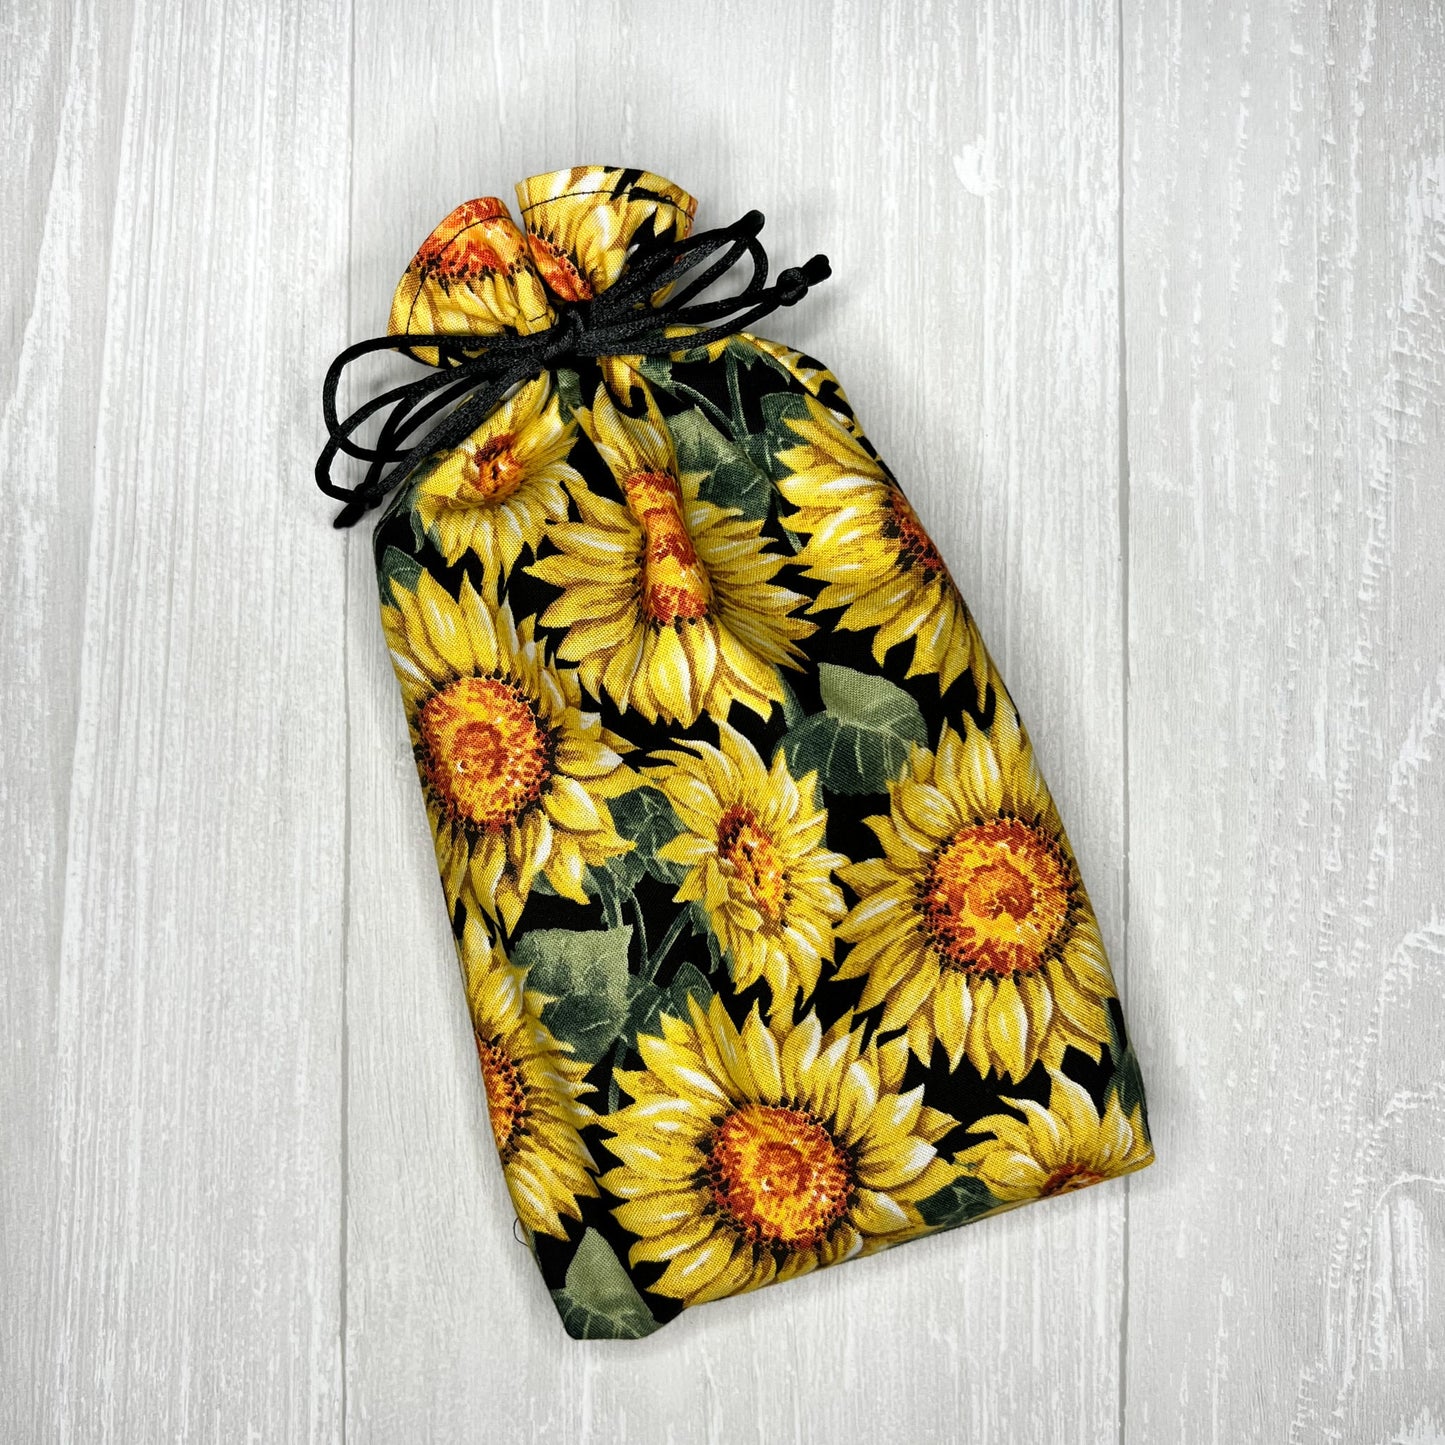 Sunflower Large Tarot Deck Bag, Tarot & Oracle Drawstring Pouch, Large Deck Storage Holder, Tarot Reader Birthday Gift, Witch Pagan Tools